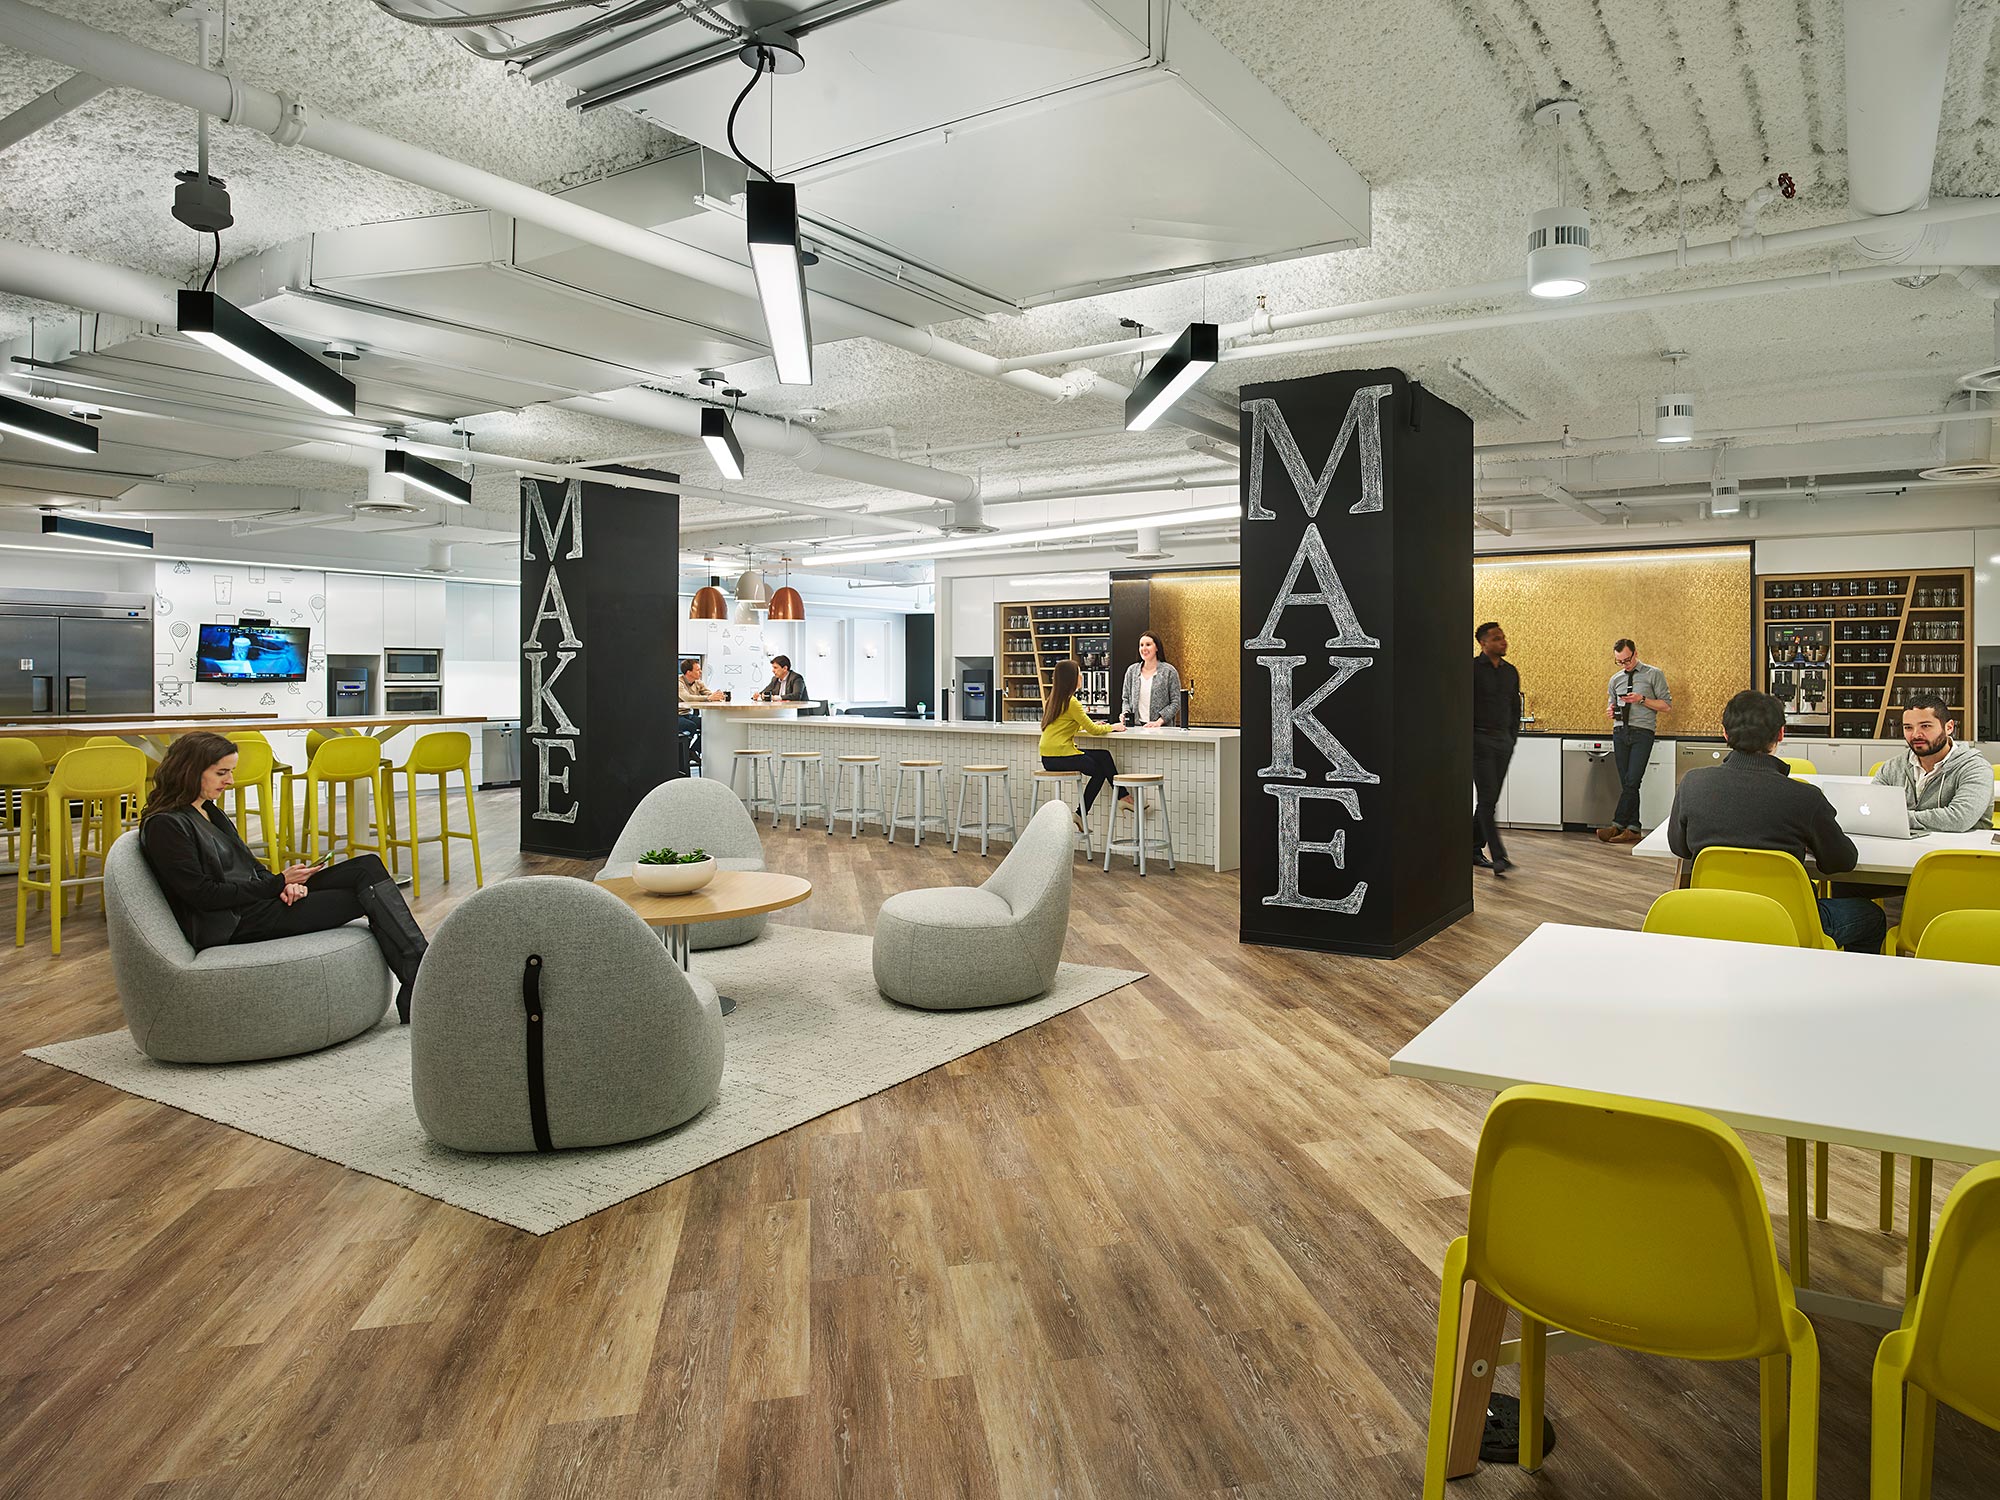 London Coworking Spaces: 7 Inspiring Spots For Your Ideas